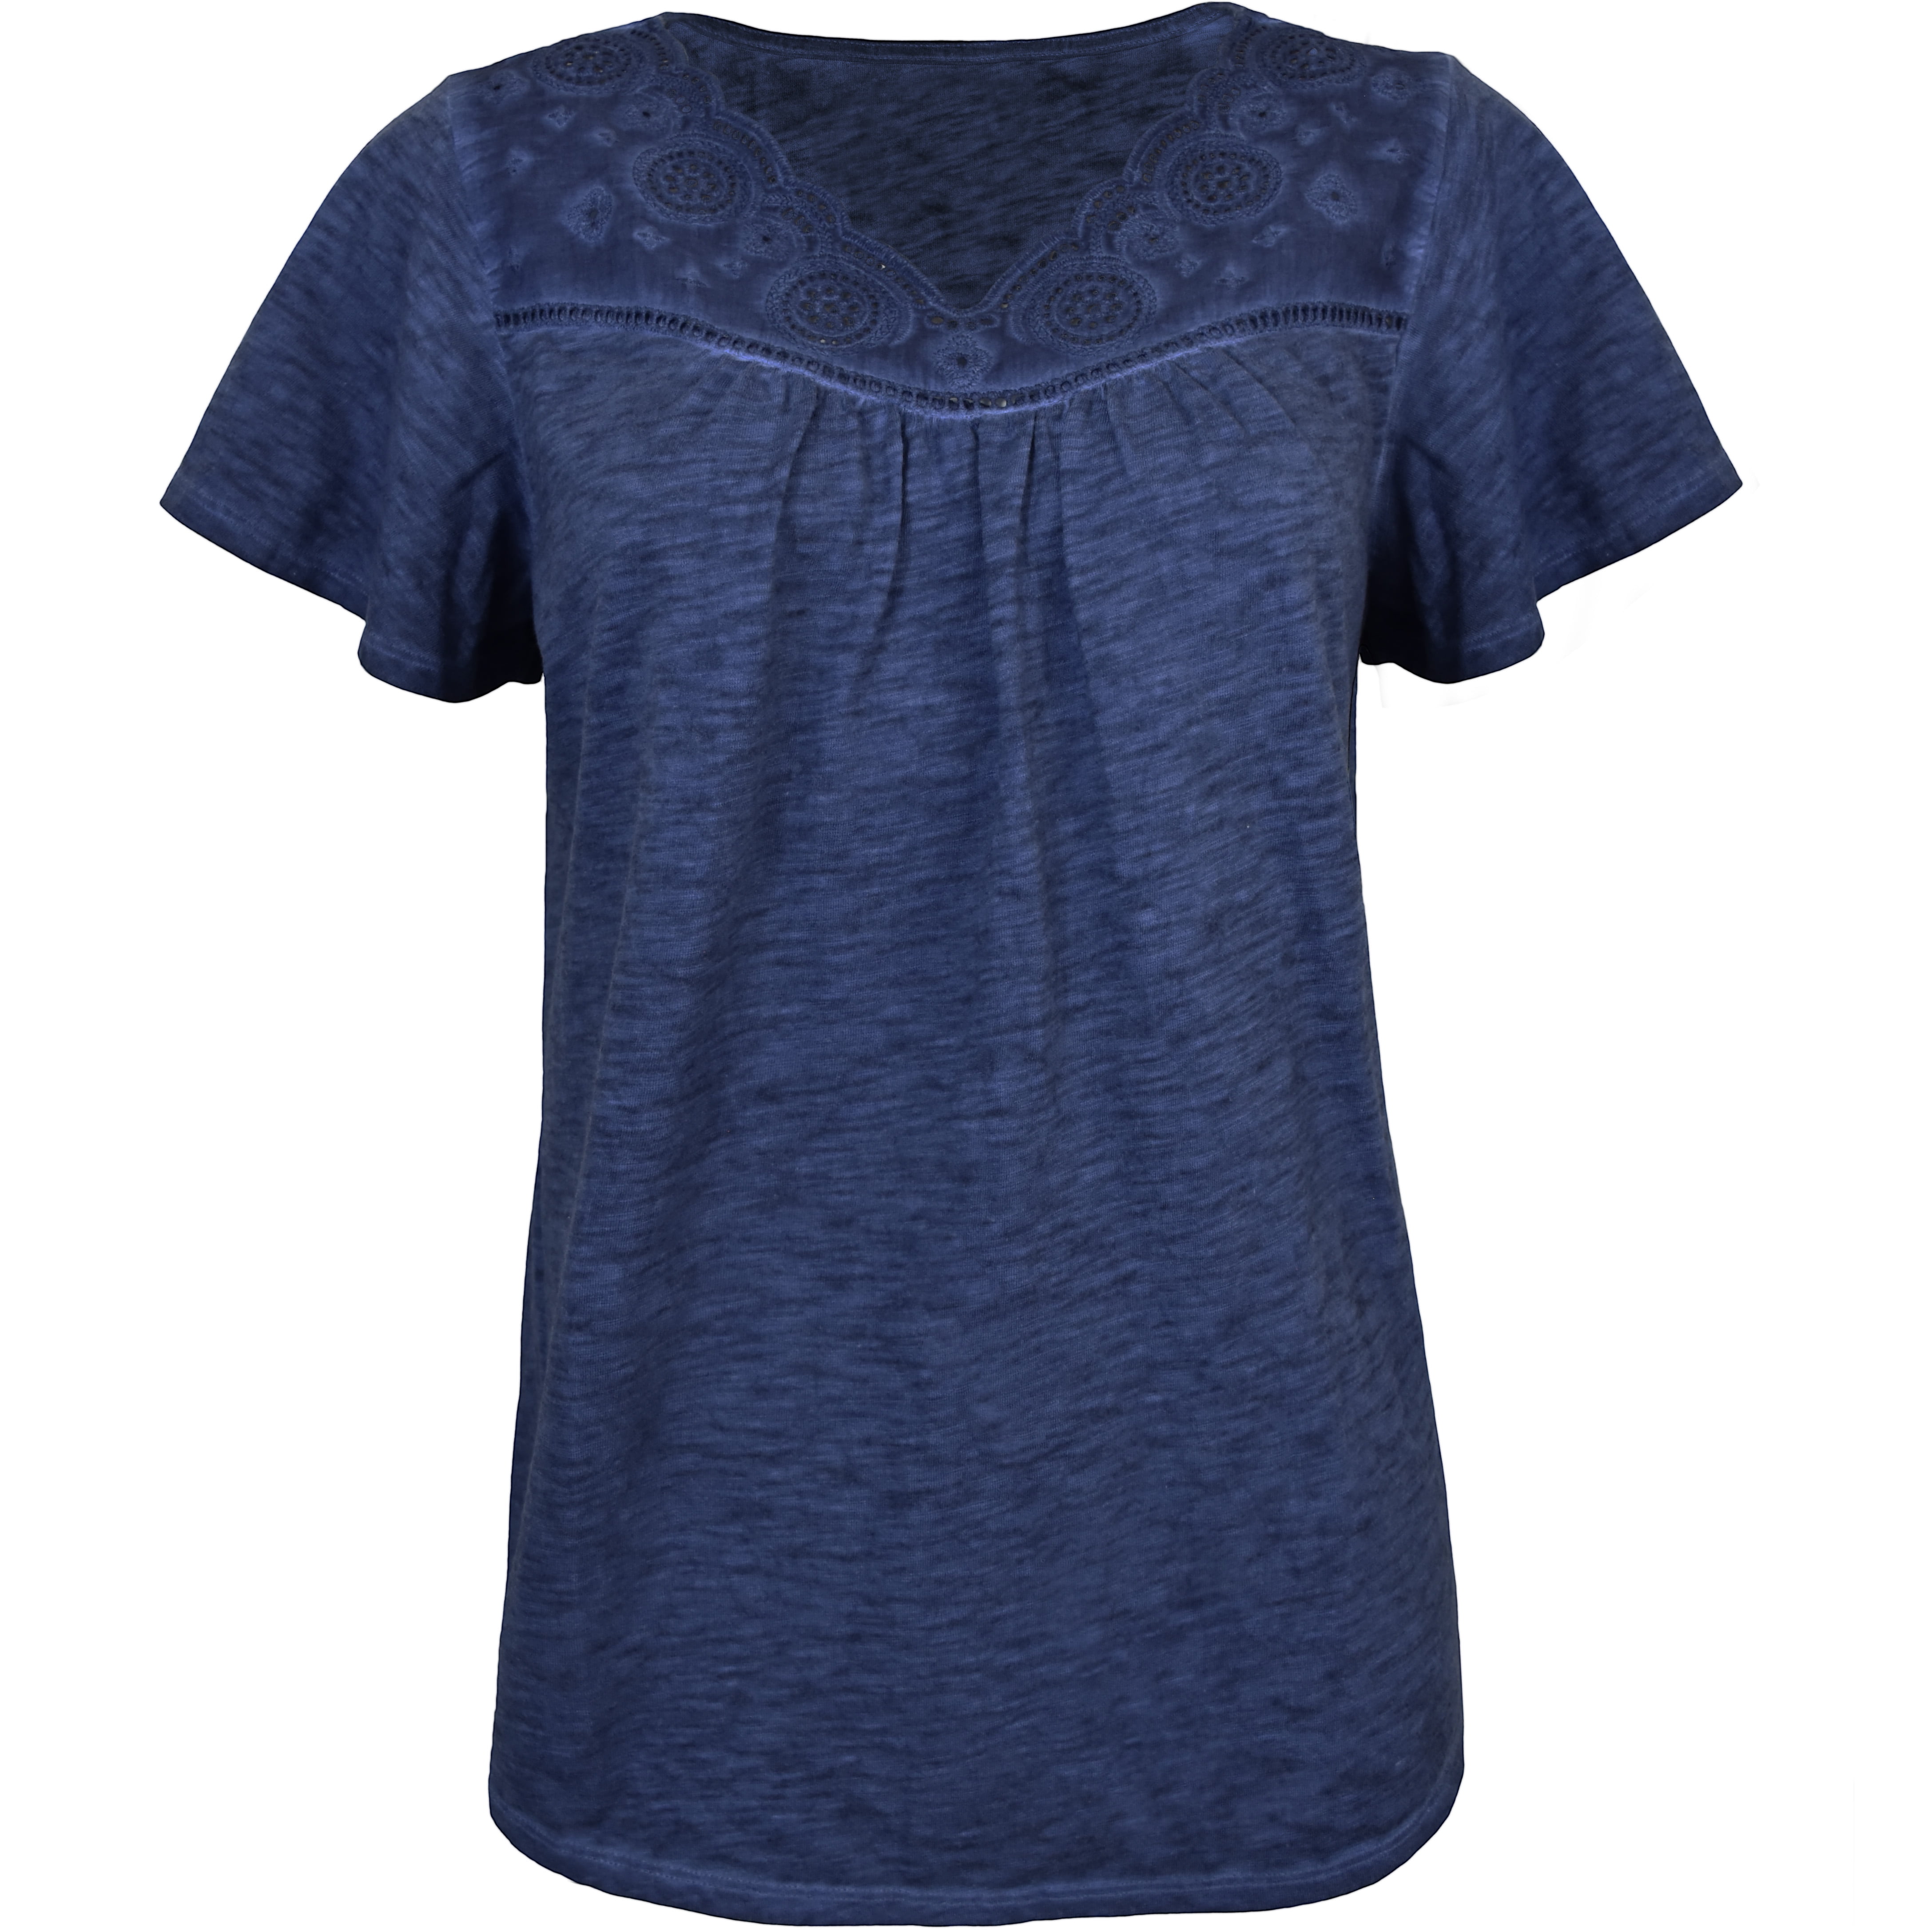 Victory Sportswear - Victory Outfitters Ladies' Floral Lace Detail Slub ...